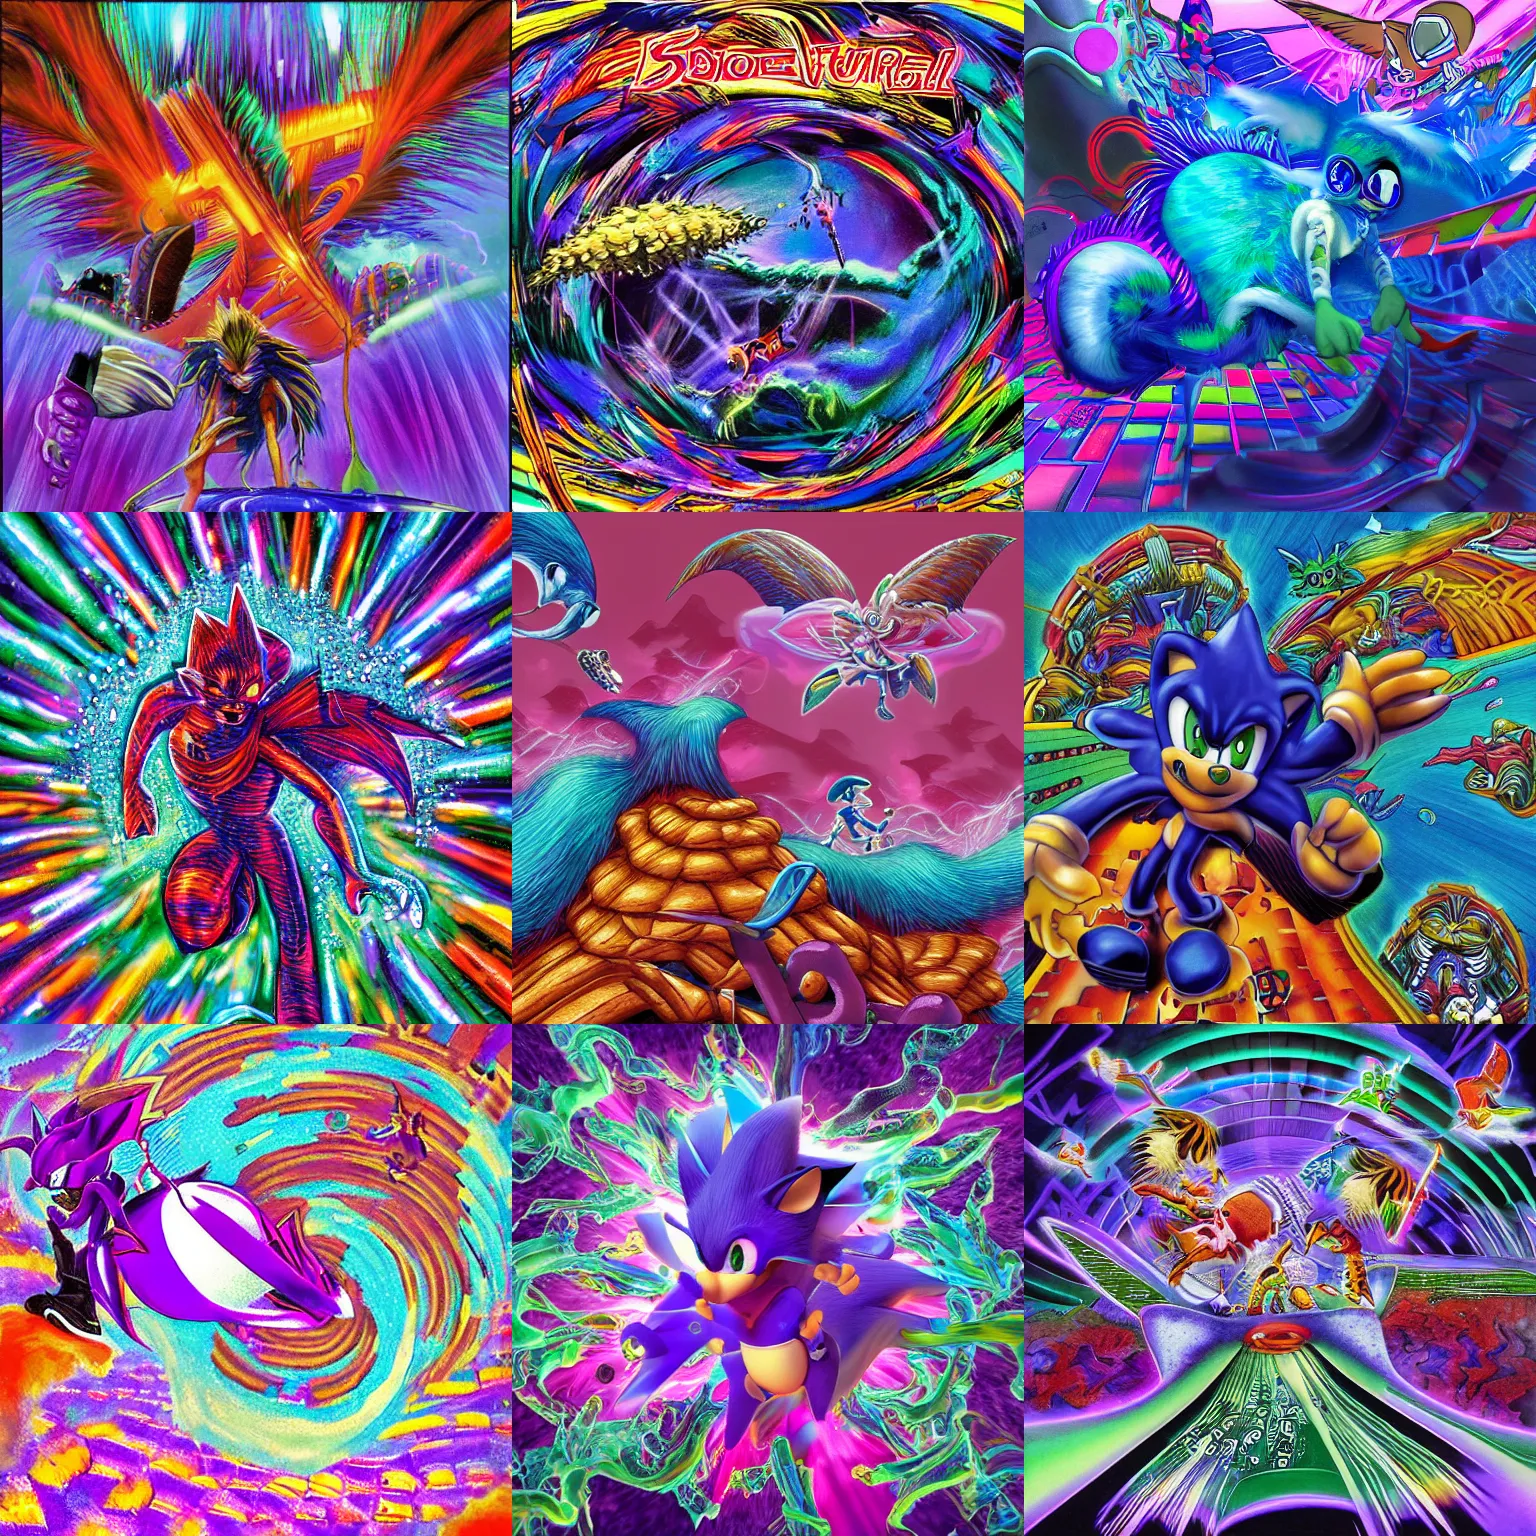 Prompt: surreal, sharp, detailed professional, high quality airbrush art MGMT album cover of a liquid dissolving LSD DMT blue sonic the hedgehog surfing through cyberspace, purple checkerboard background, 1990s 1992 Sega Genesis video game album cover